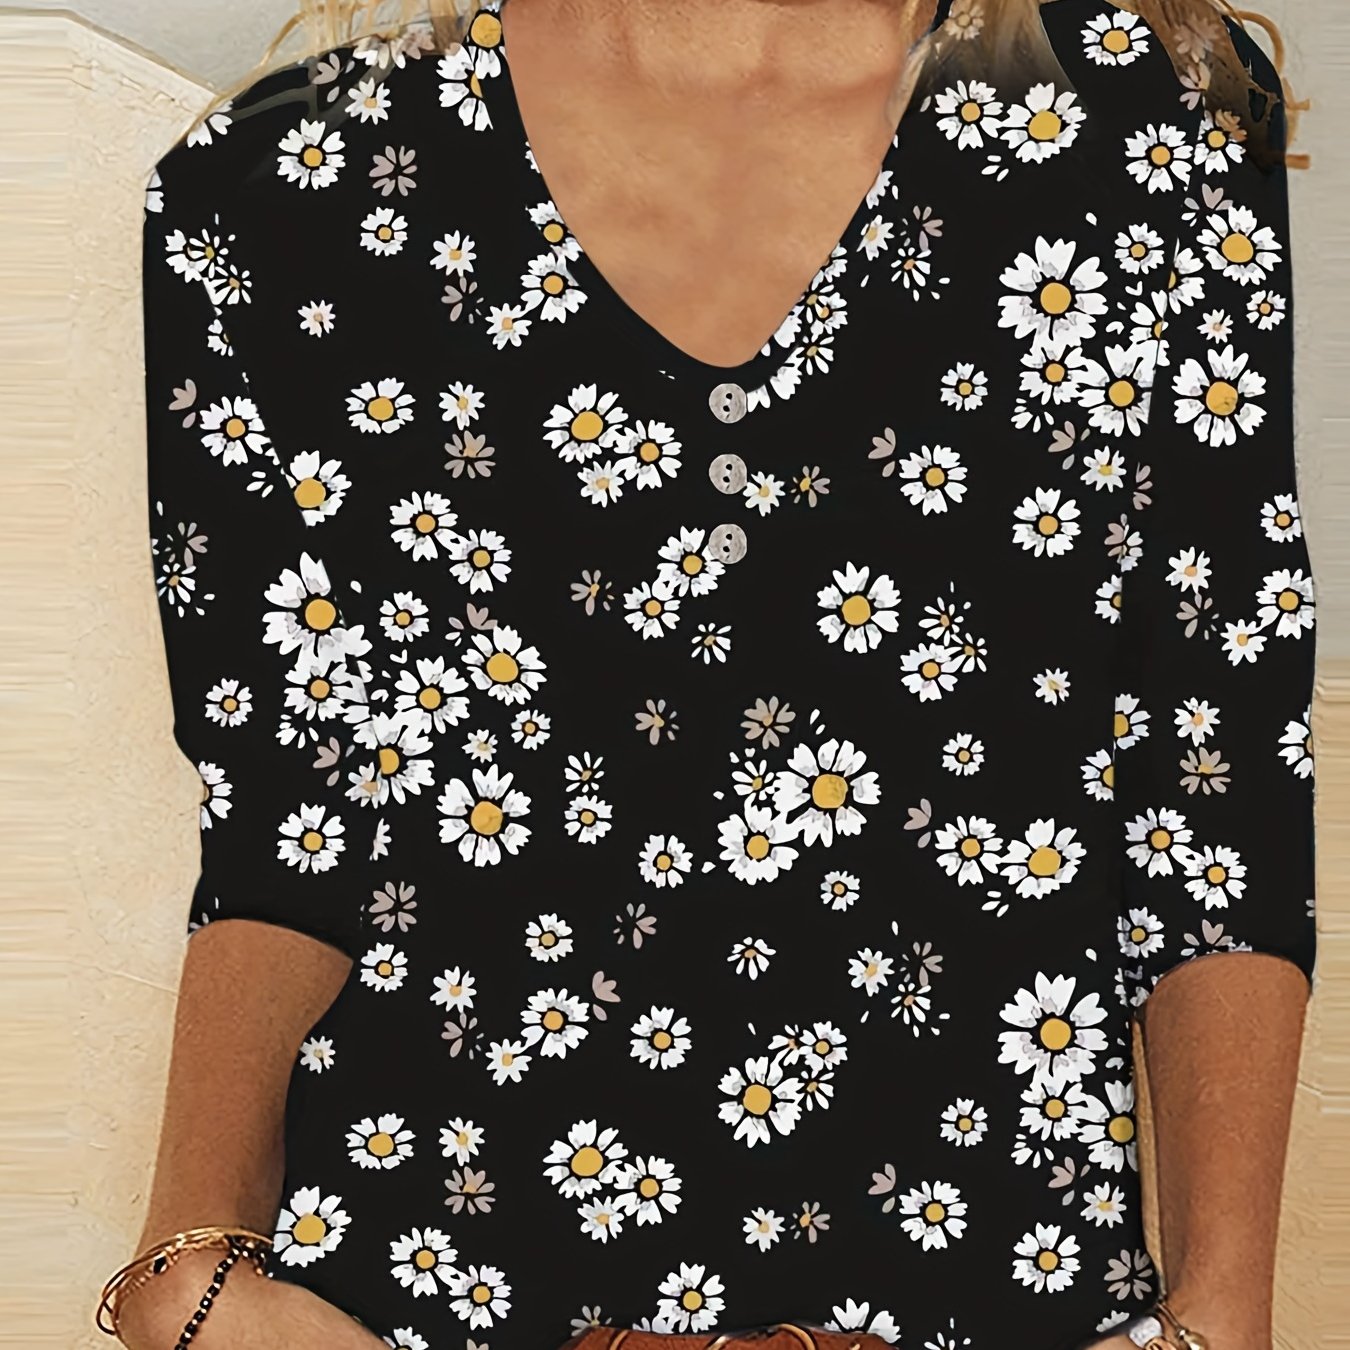 floral print button v neck t shirt casual long sleeve top for spring fall womens clothing